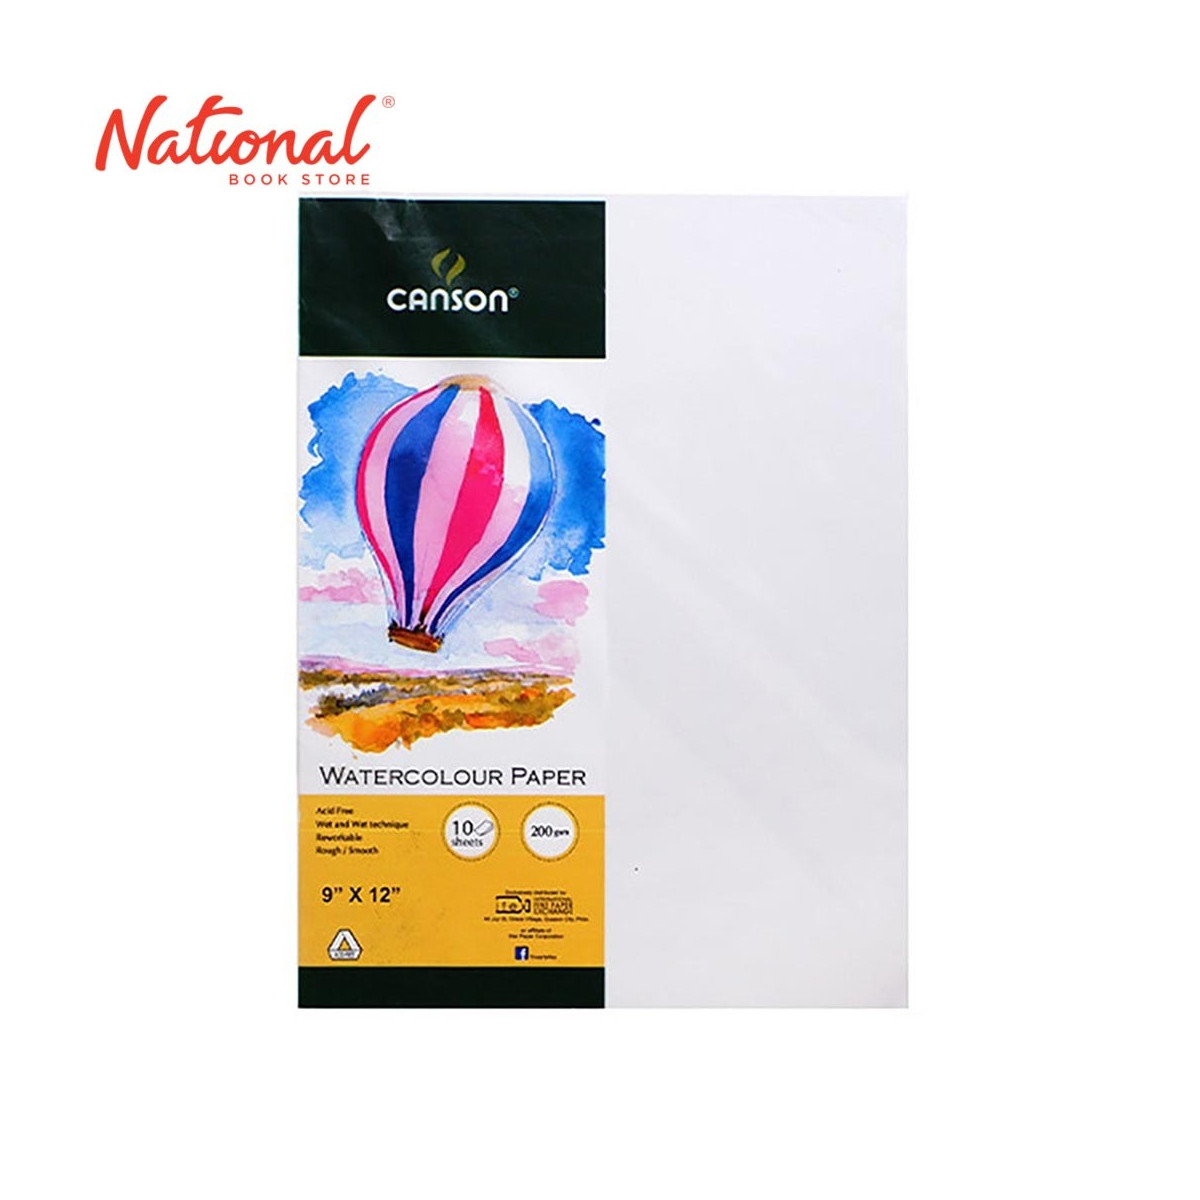 CANSON WATERCOLOR PAPER 9X12 10 SHEETS 200GSM